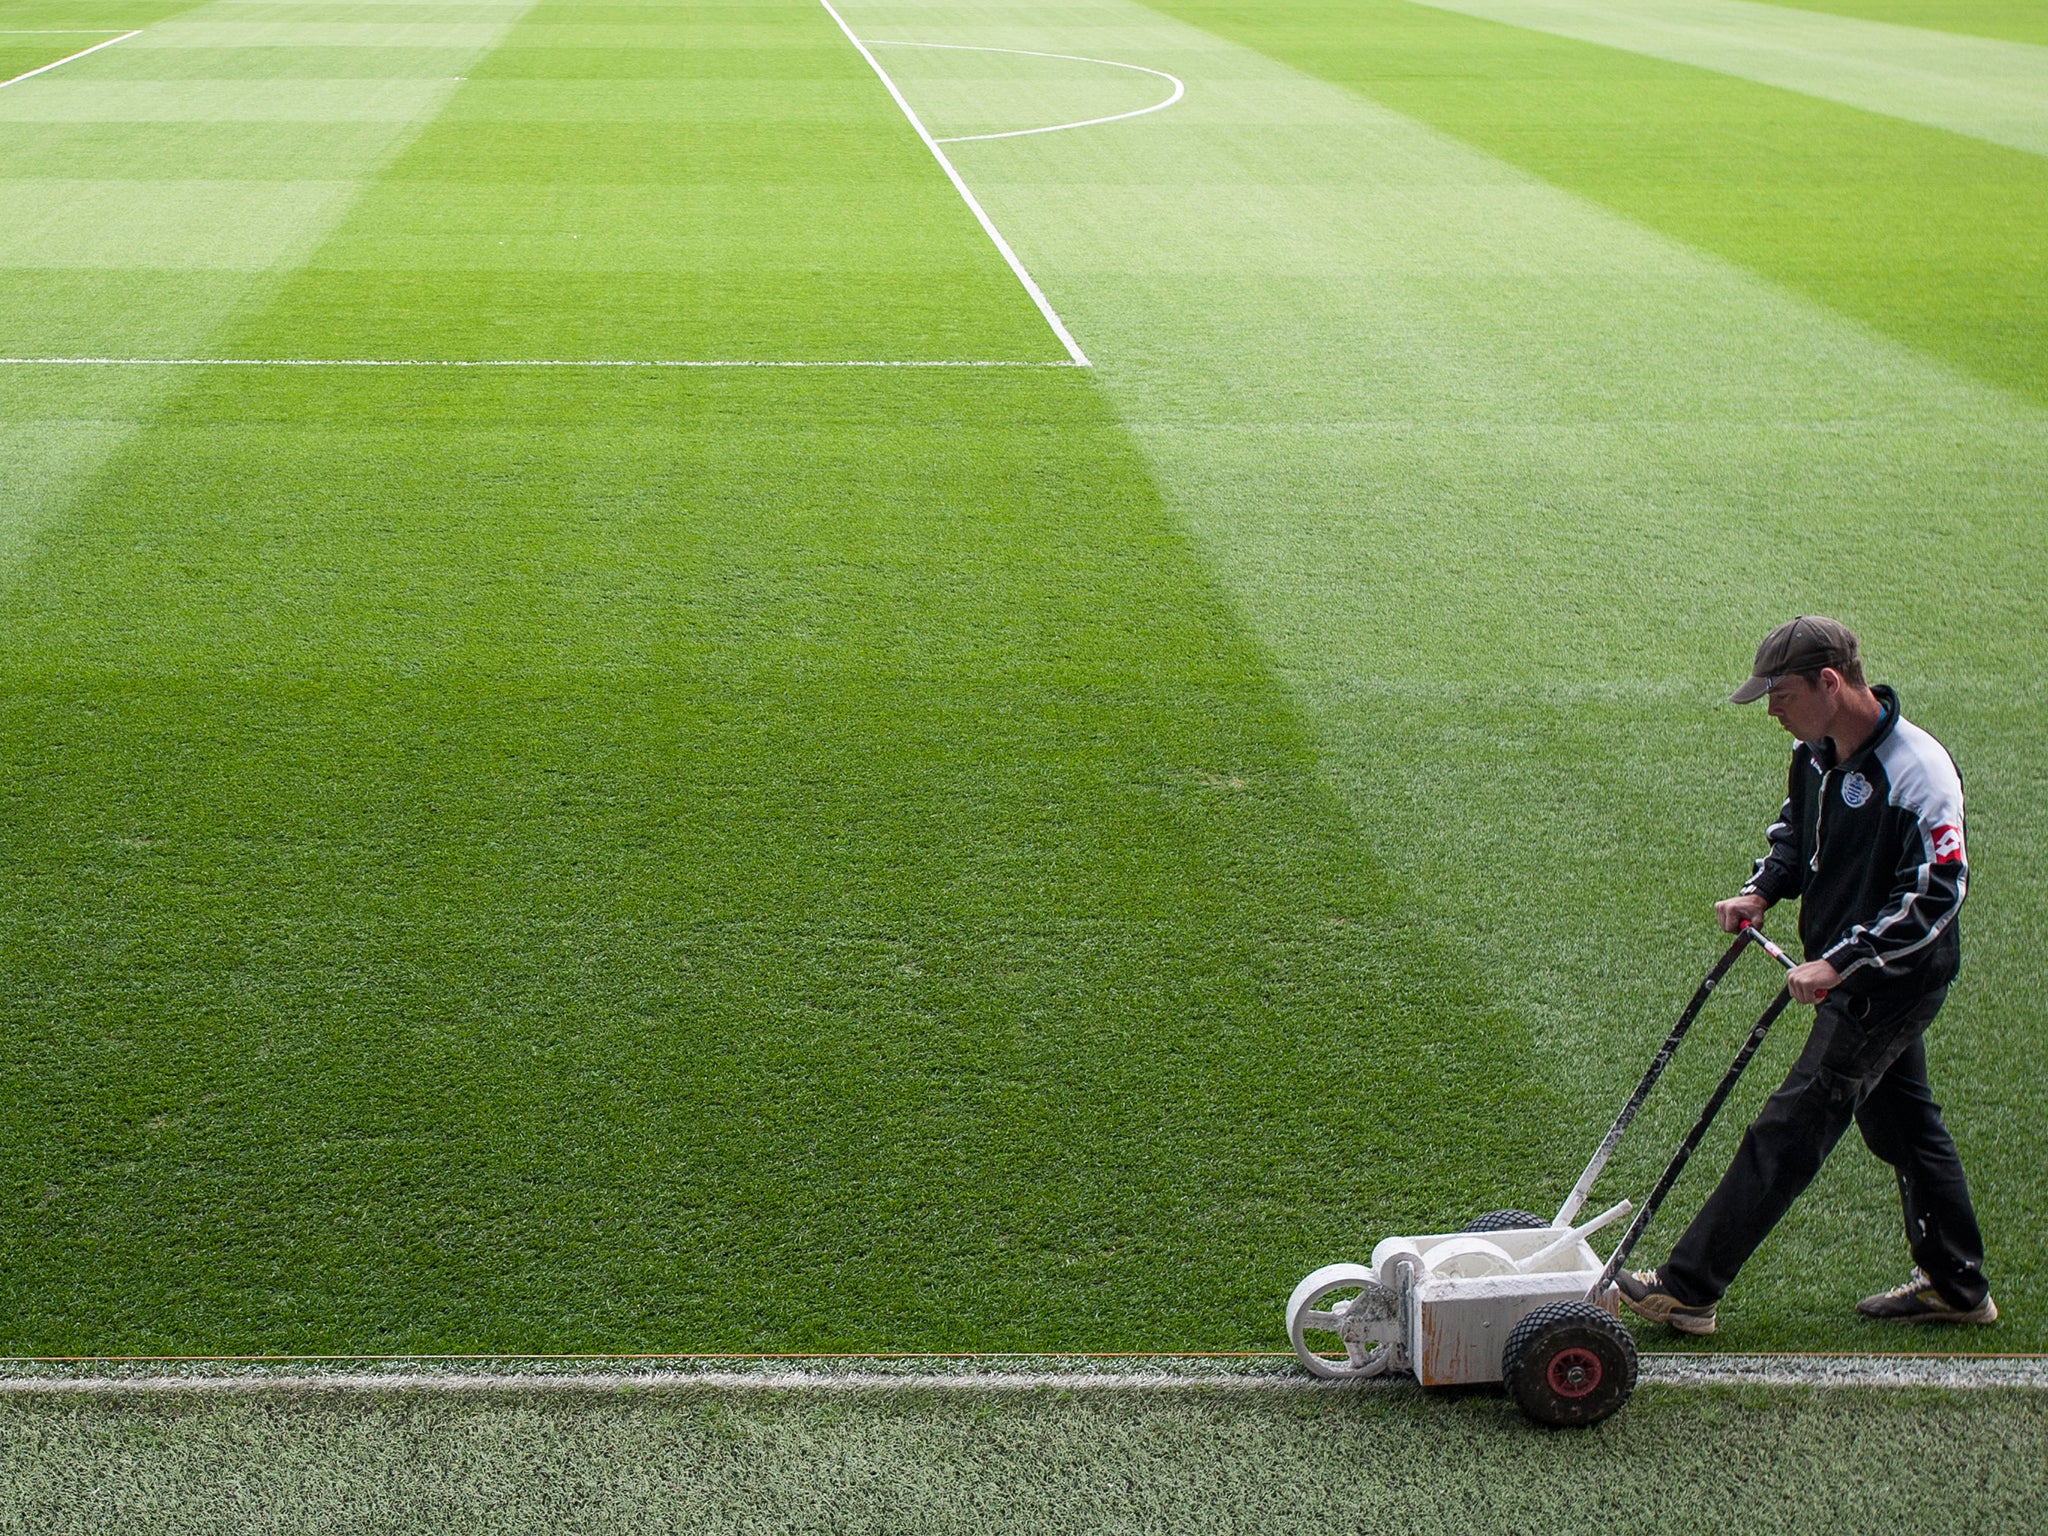 Football clubs are under pressure to pay all their staff the Living Wage